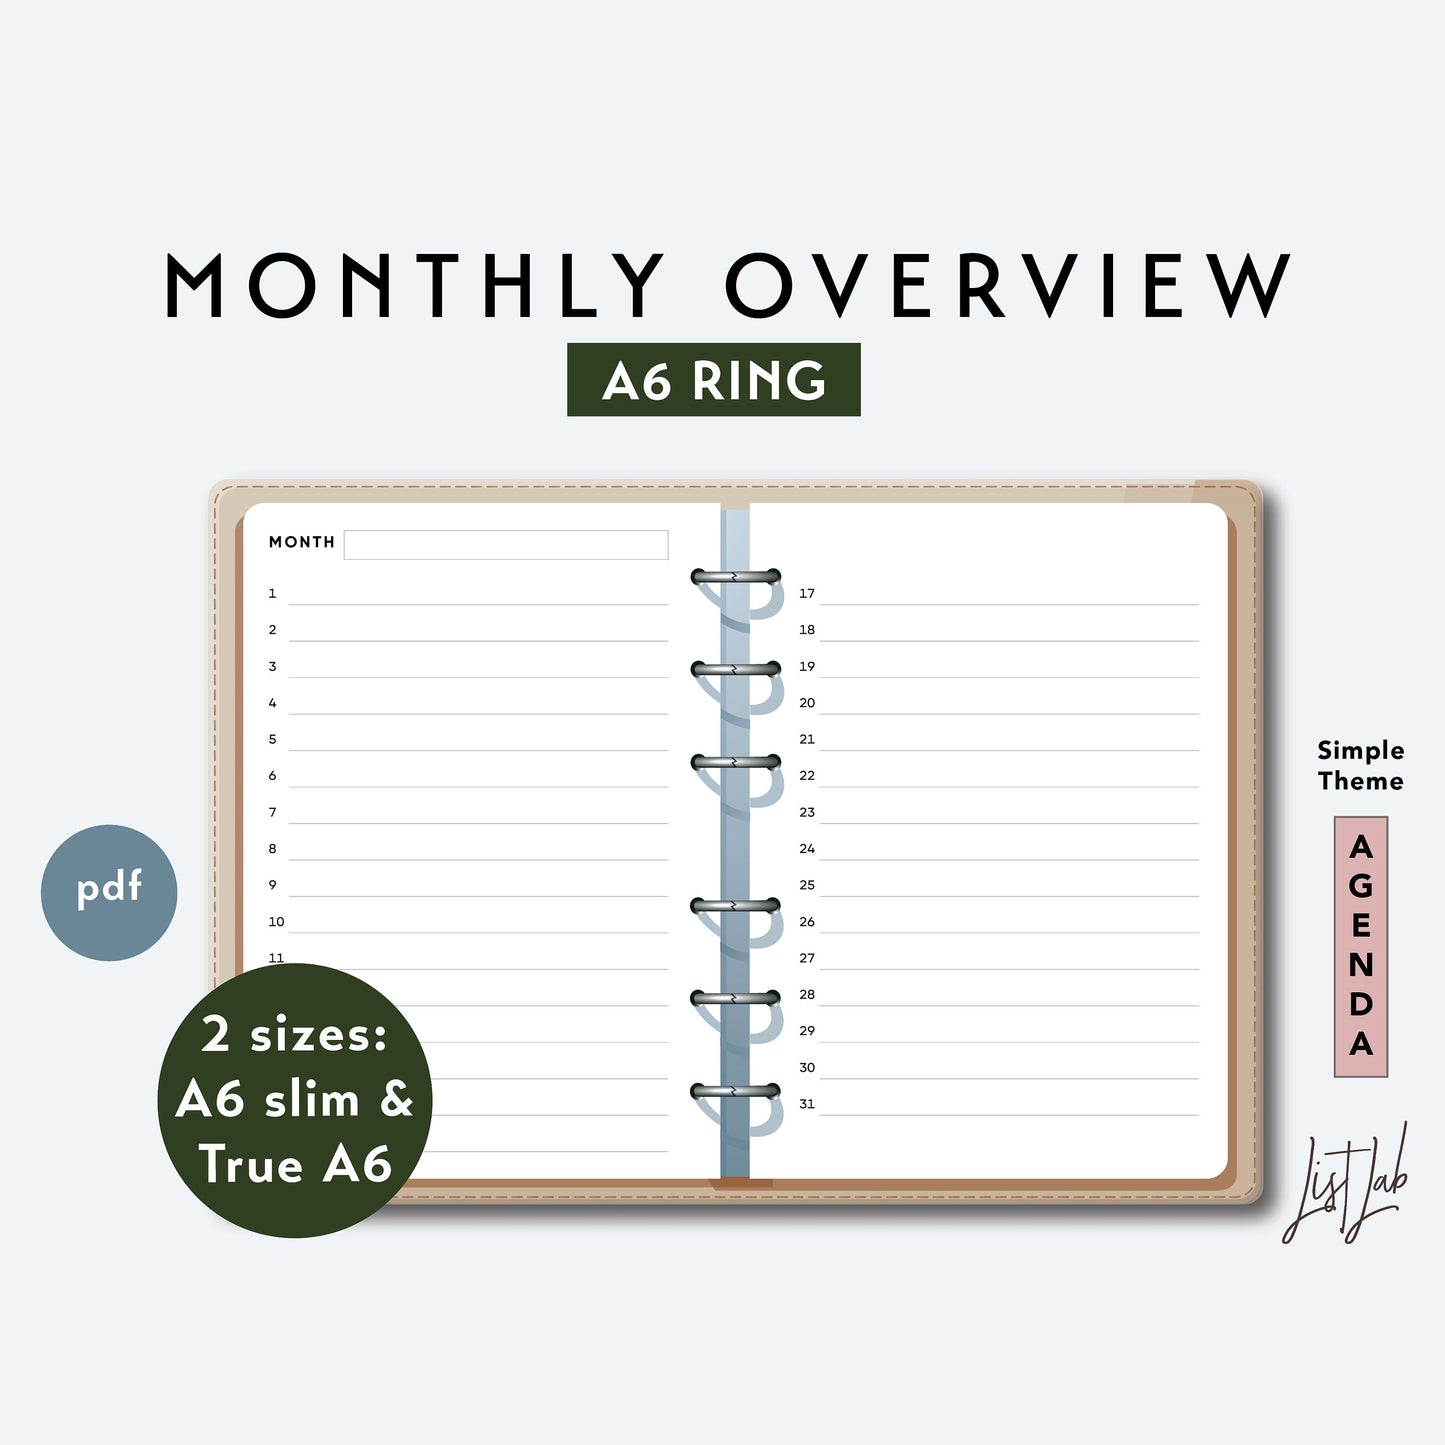 A6 Ring MONTHLY LIST OVERVIEW Printable Set